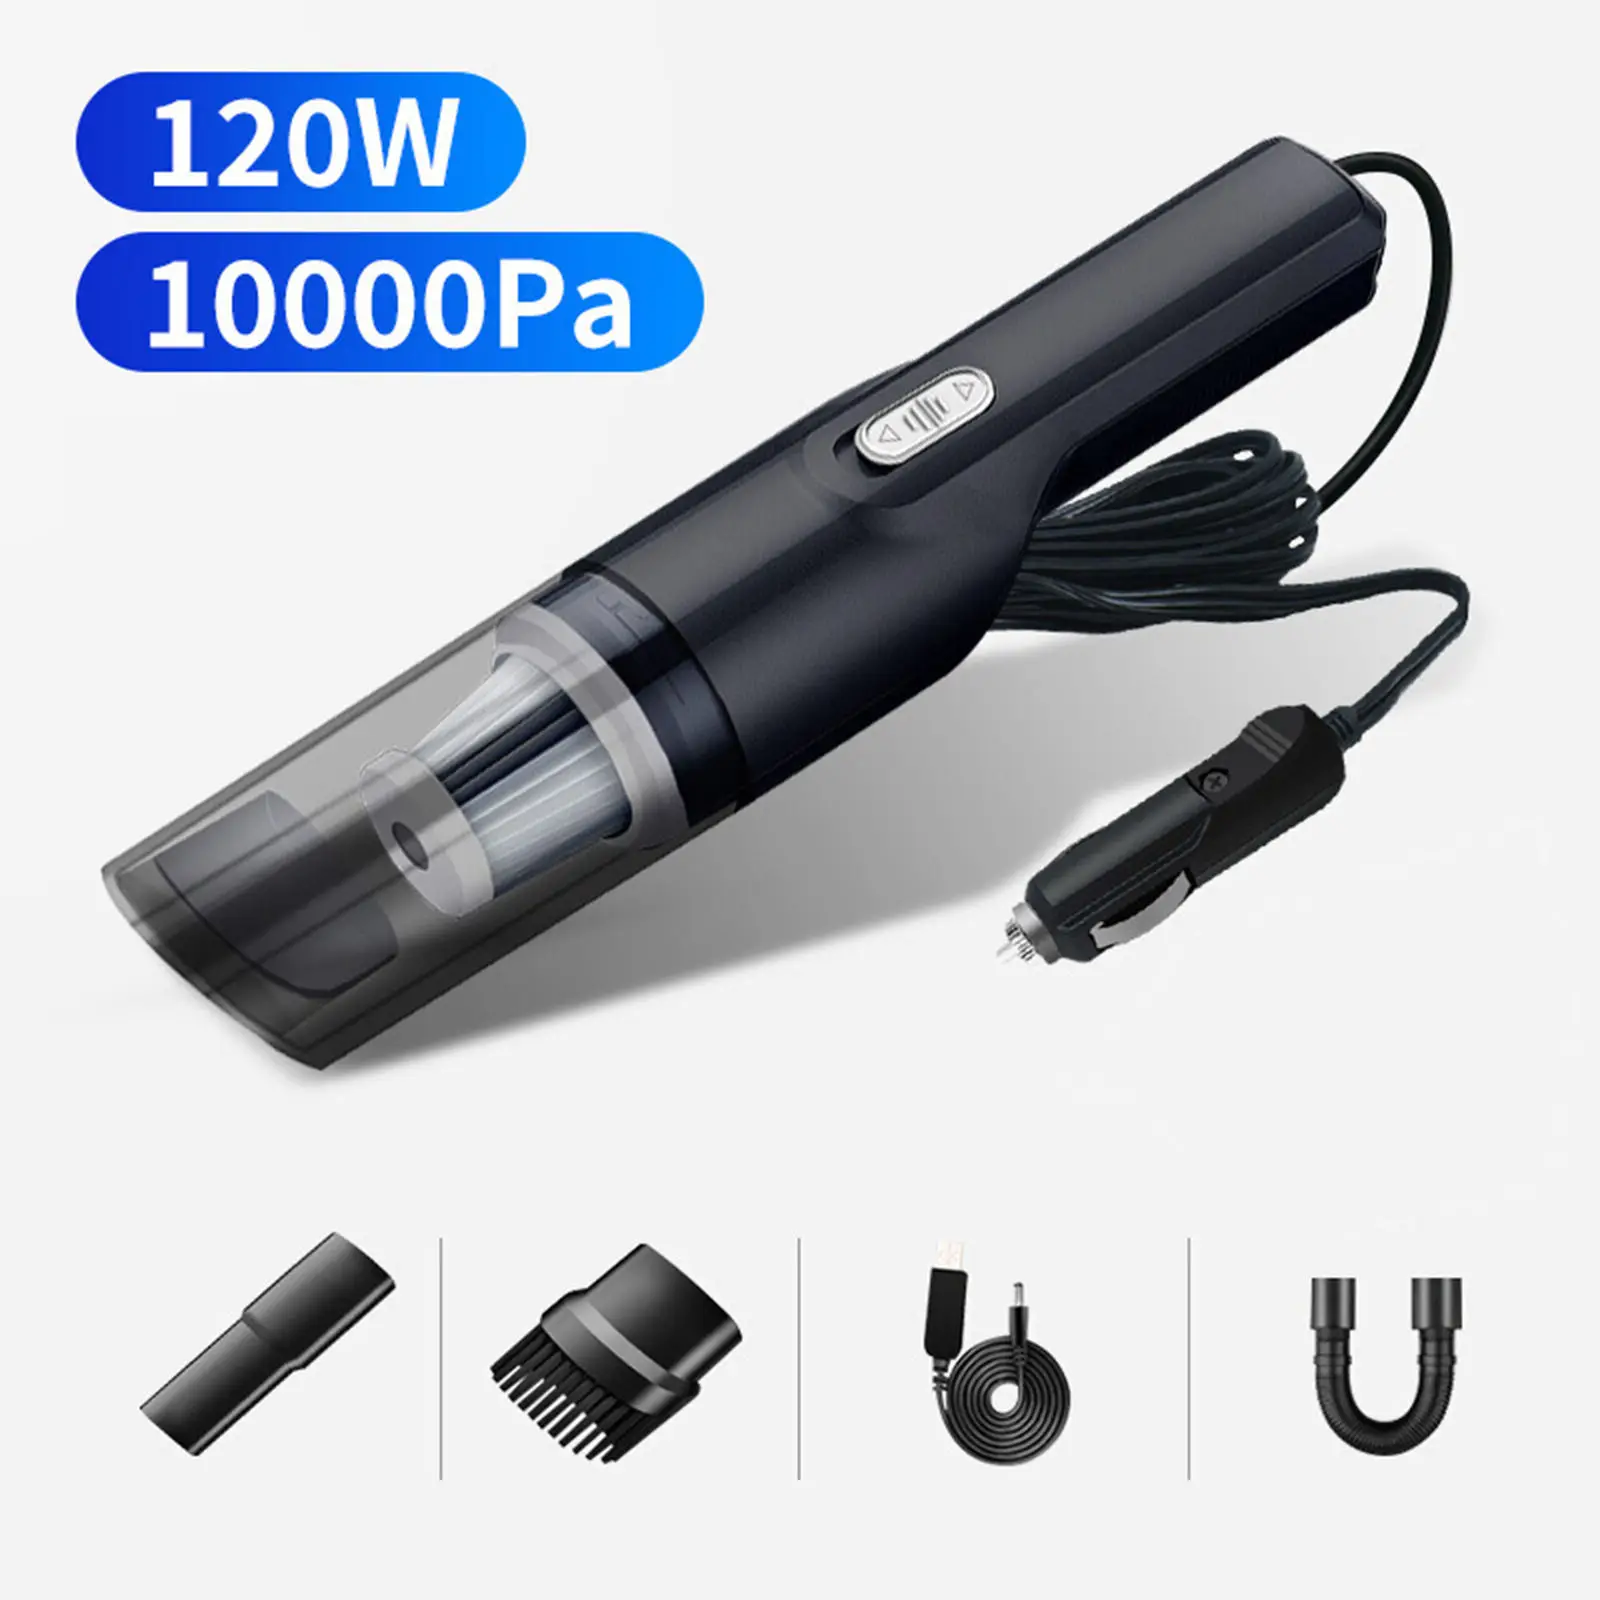 10000Pa Wireless / Wired Powerful Car Vacuum Cleaner Portable Wet&Dry Handheld Suction Auto Car Interior Seat Cleaner Vacuum